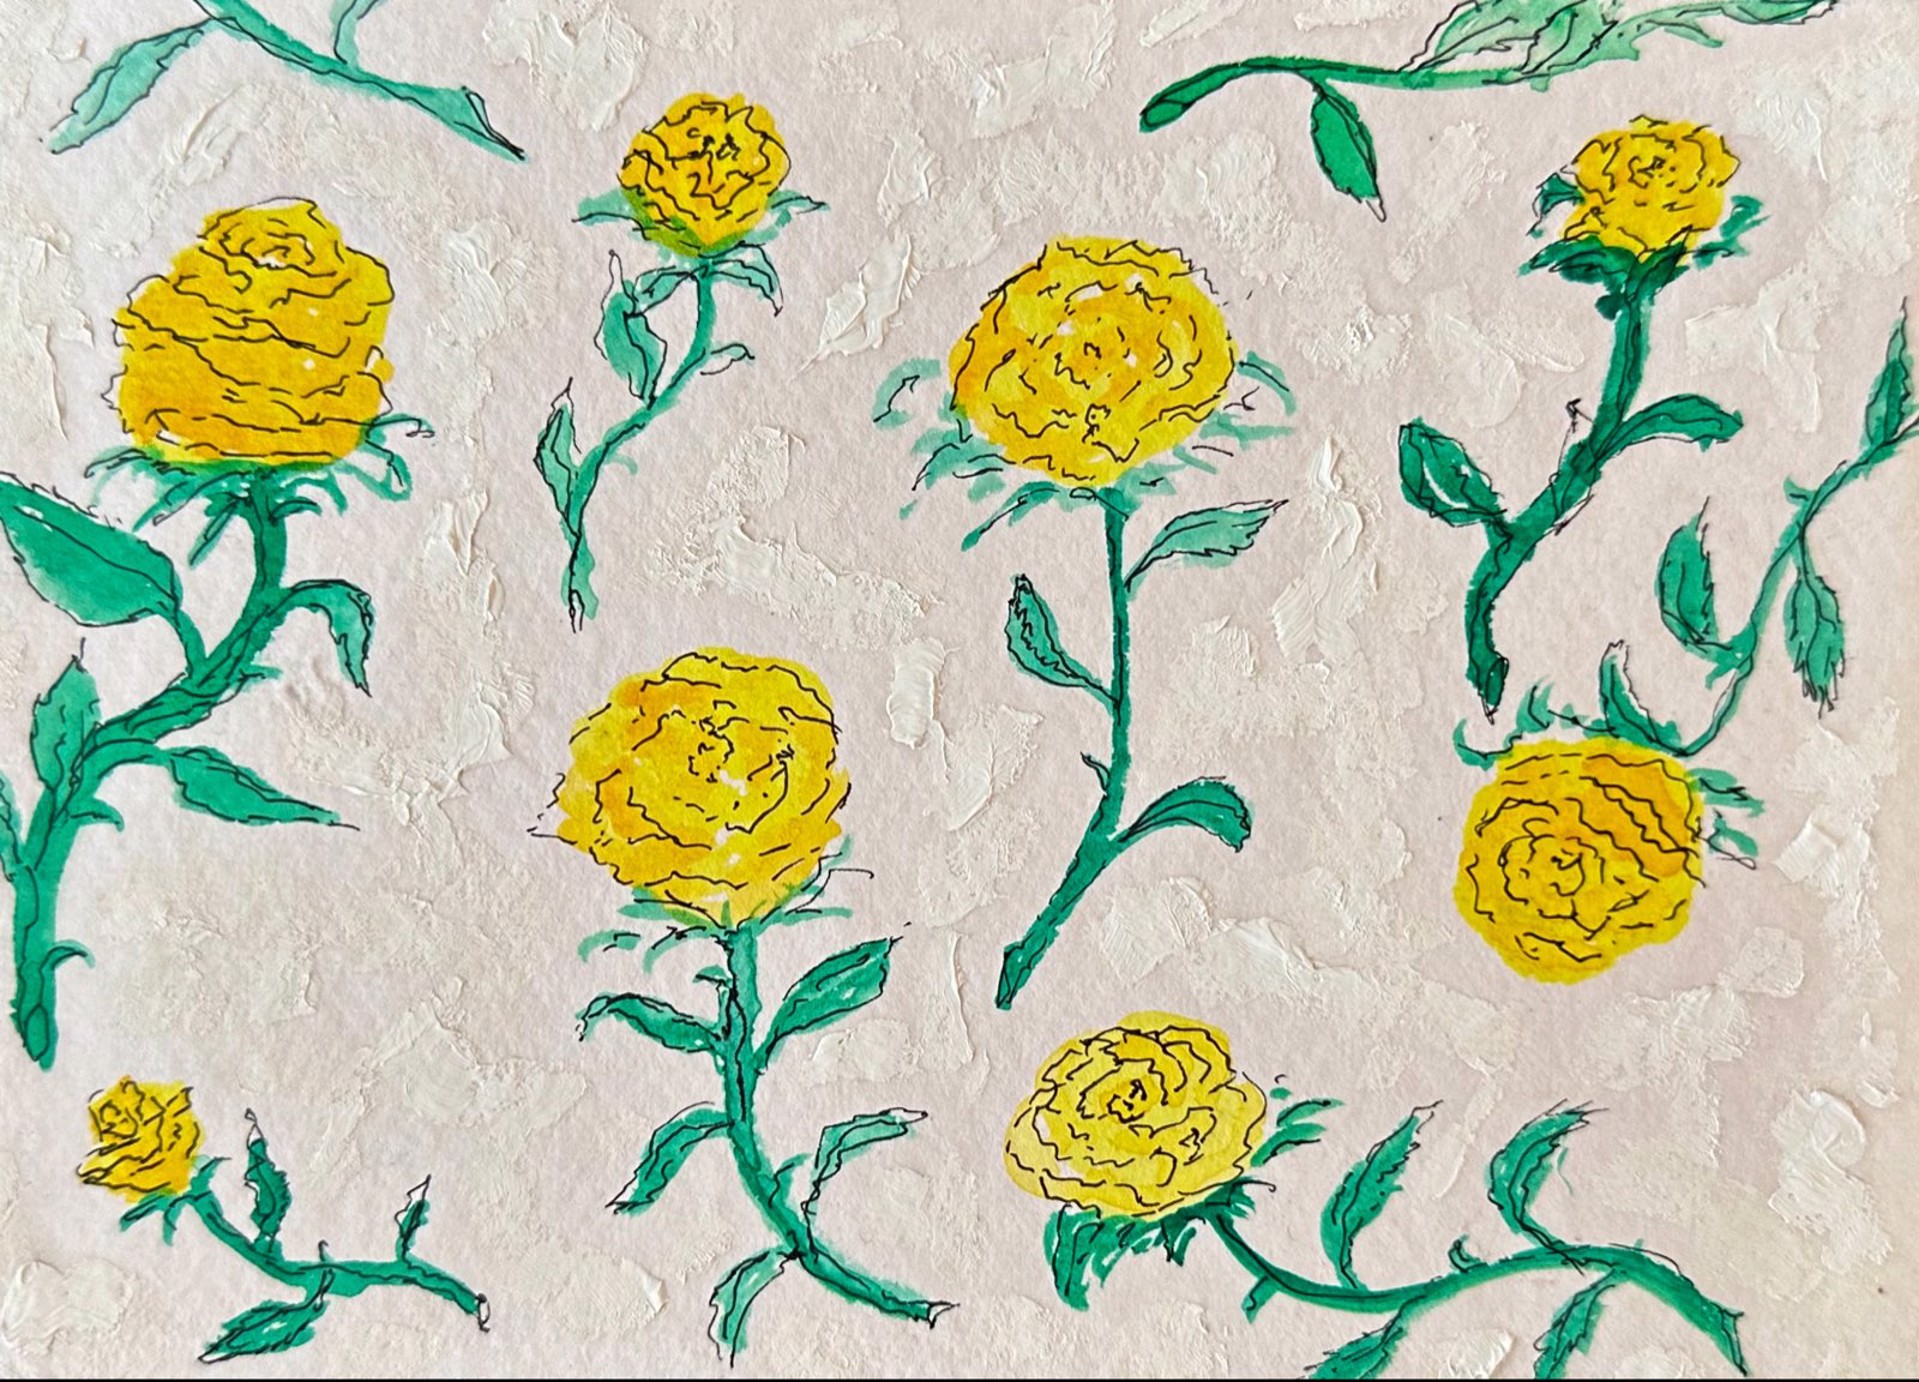 Florals in Yellow 3, matted by Mary Bragg